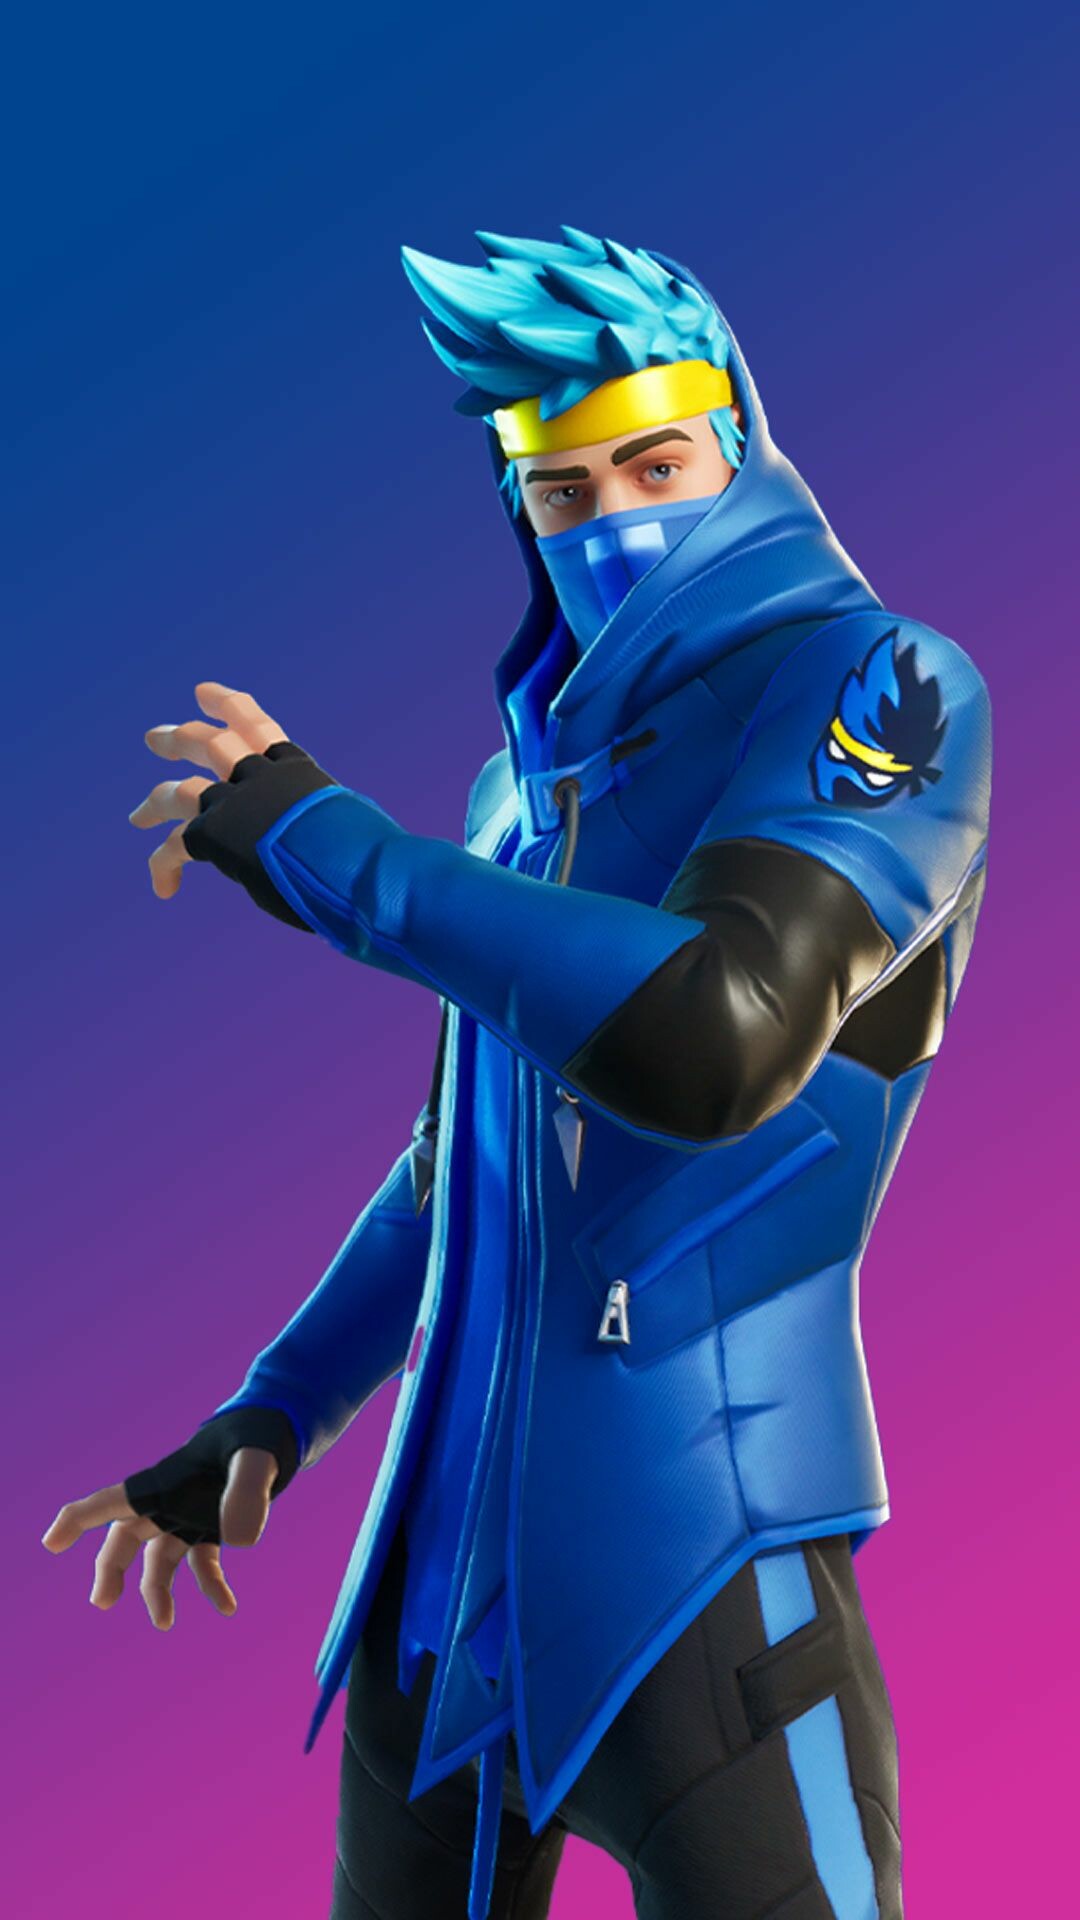 Fortnite: Ninja Skin, An Icon Series Outfit in Battle Royale, that can be purchased in the Item Shop. 1080x1920 Full HD Wallpaper.